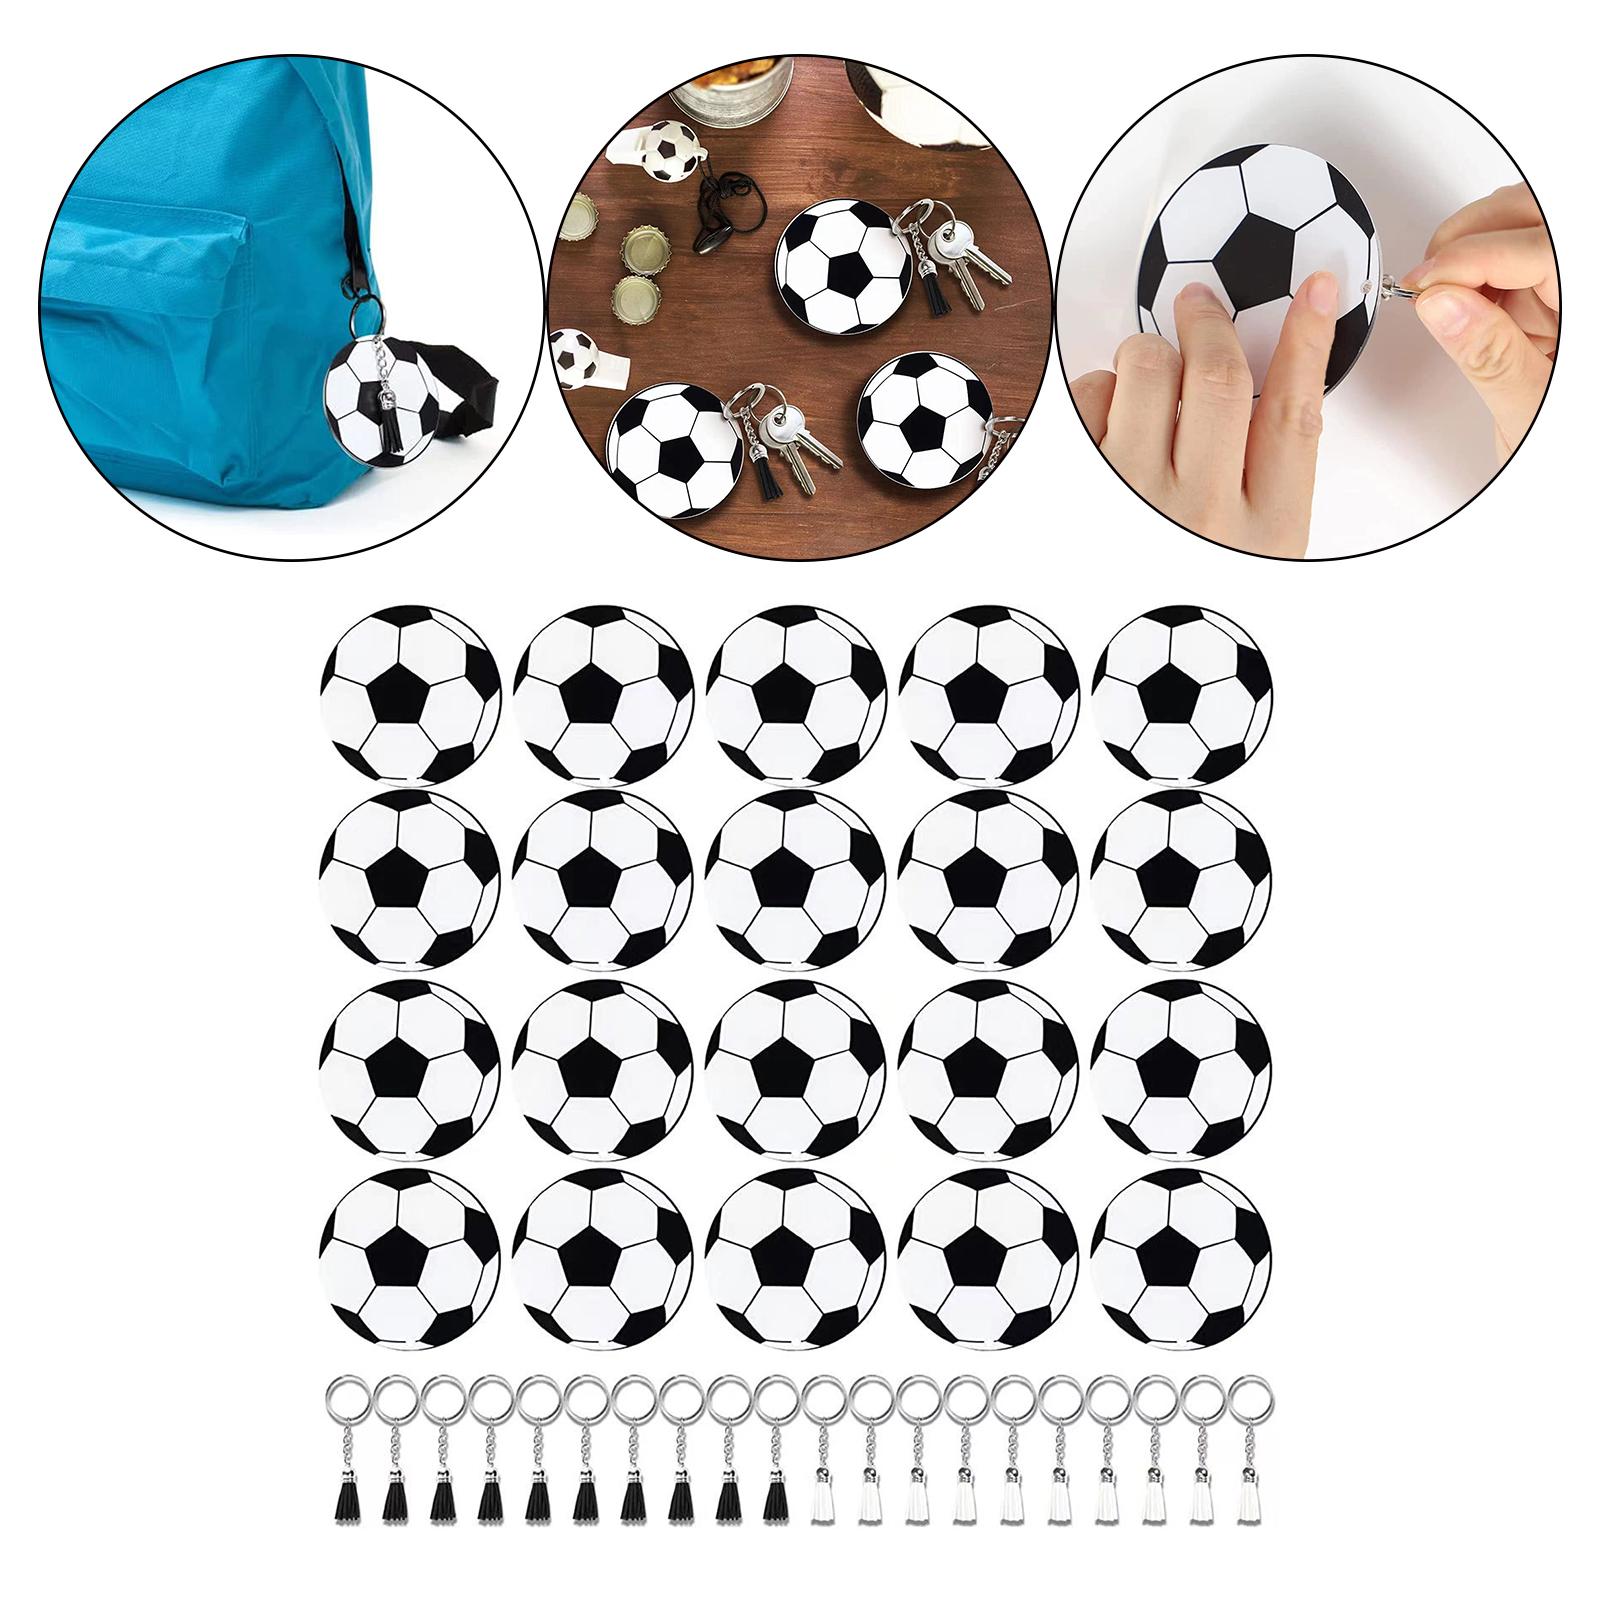 20 Pieces Football Keychains with PU Leather Tassels for Kids Party Favors